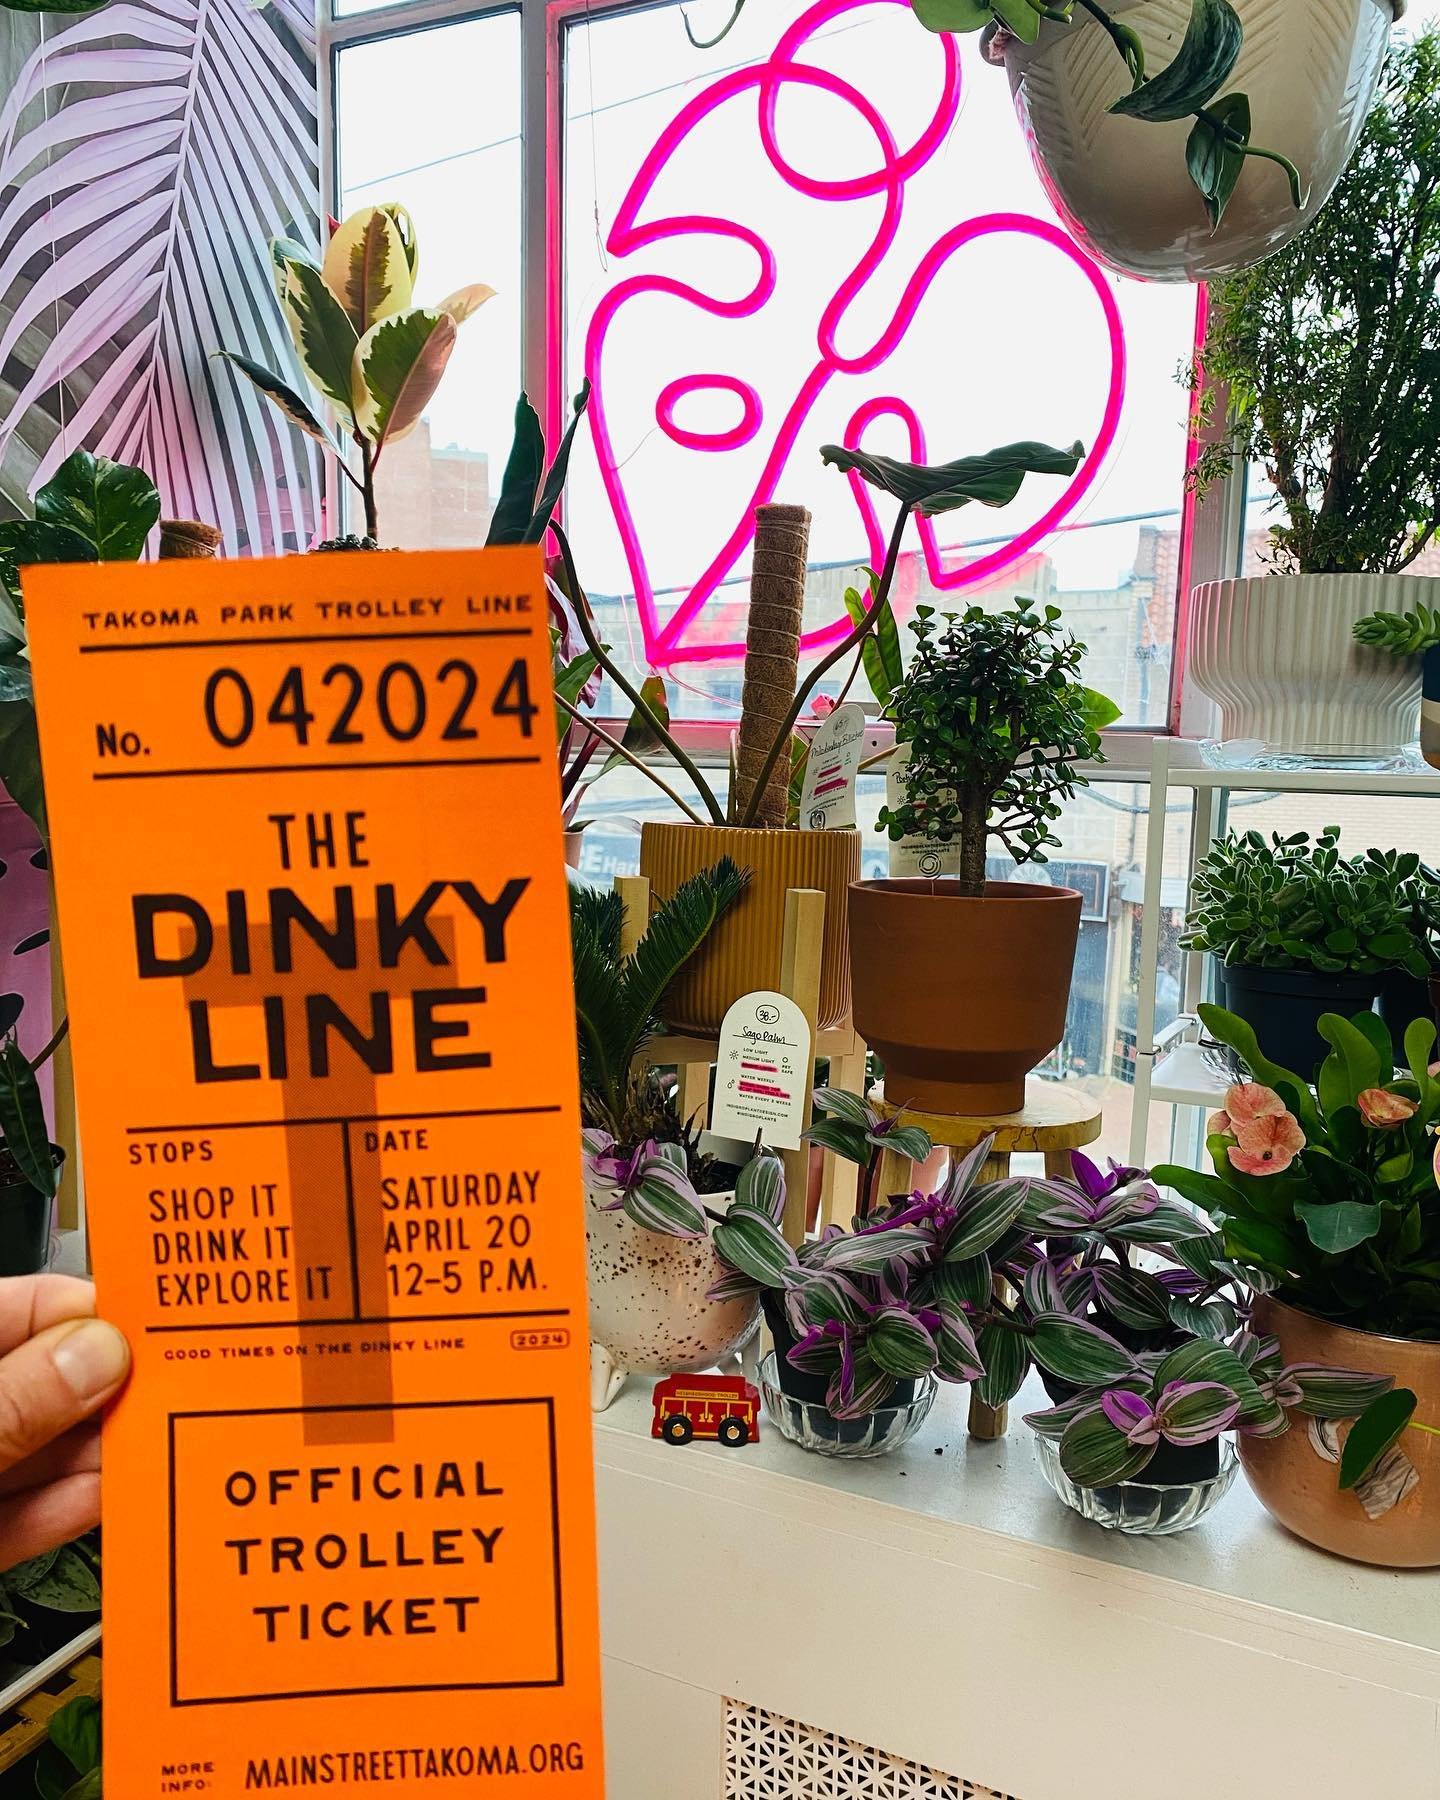 All aboard a fun weekend ahead! 

🚞 Saturday 4/20 - find the hidden trolley in the shop &amp; get your ticket stamped. 
Make a Dinky Line cactus garden &amp; save 20% on all plants &amp; planters.

⚡️Sunday 4/21 - find is at the Market on the Street